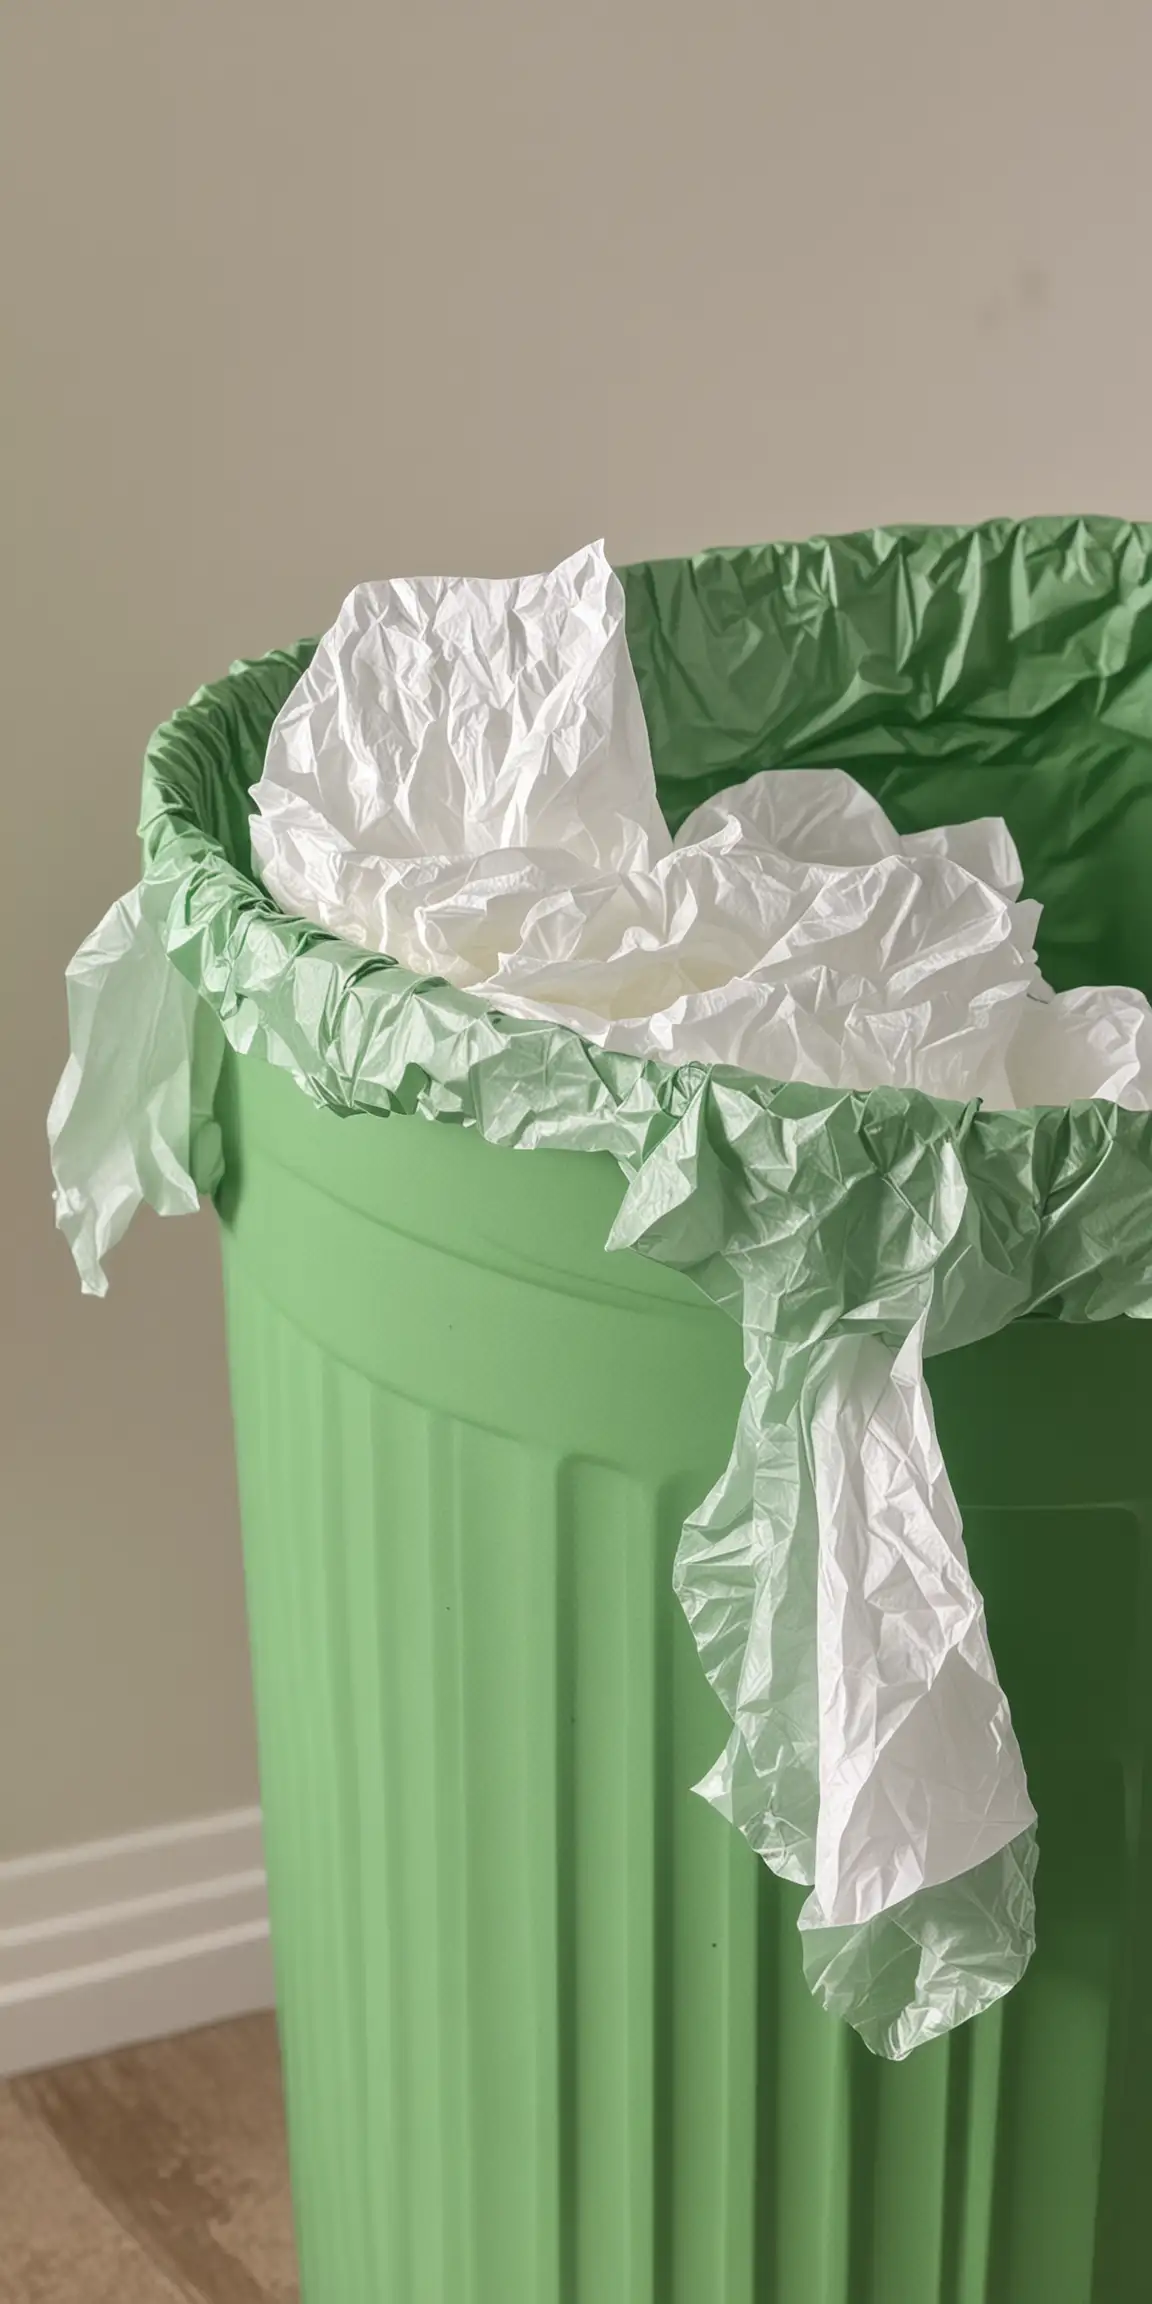 ugc image of a green trash can with tissue paper. Close up